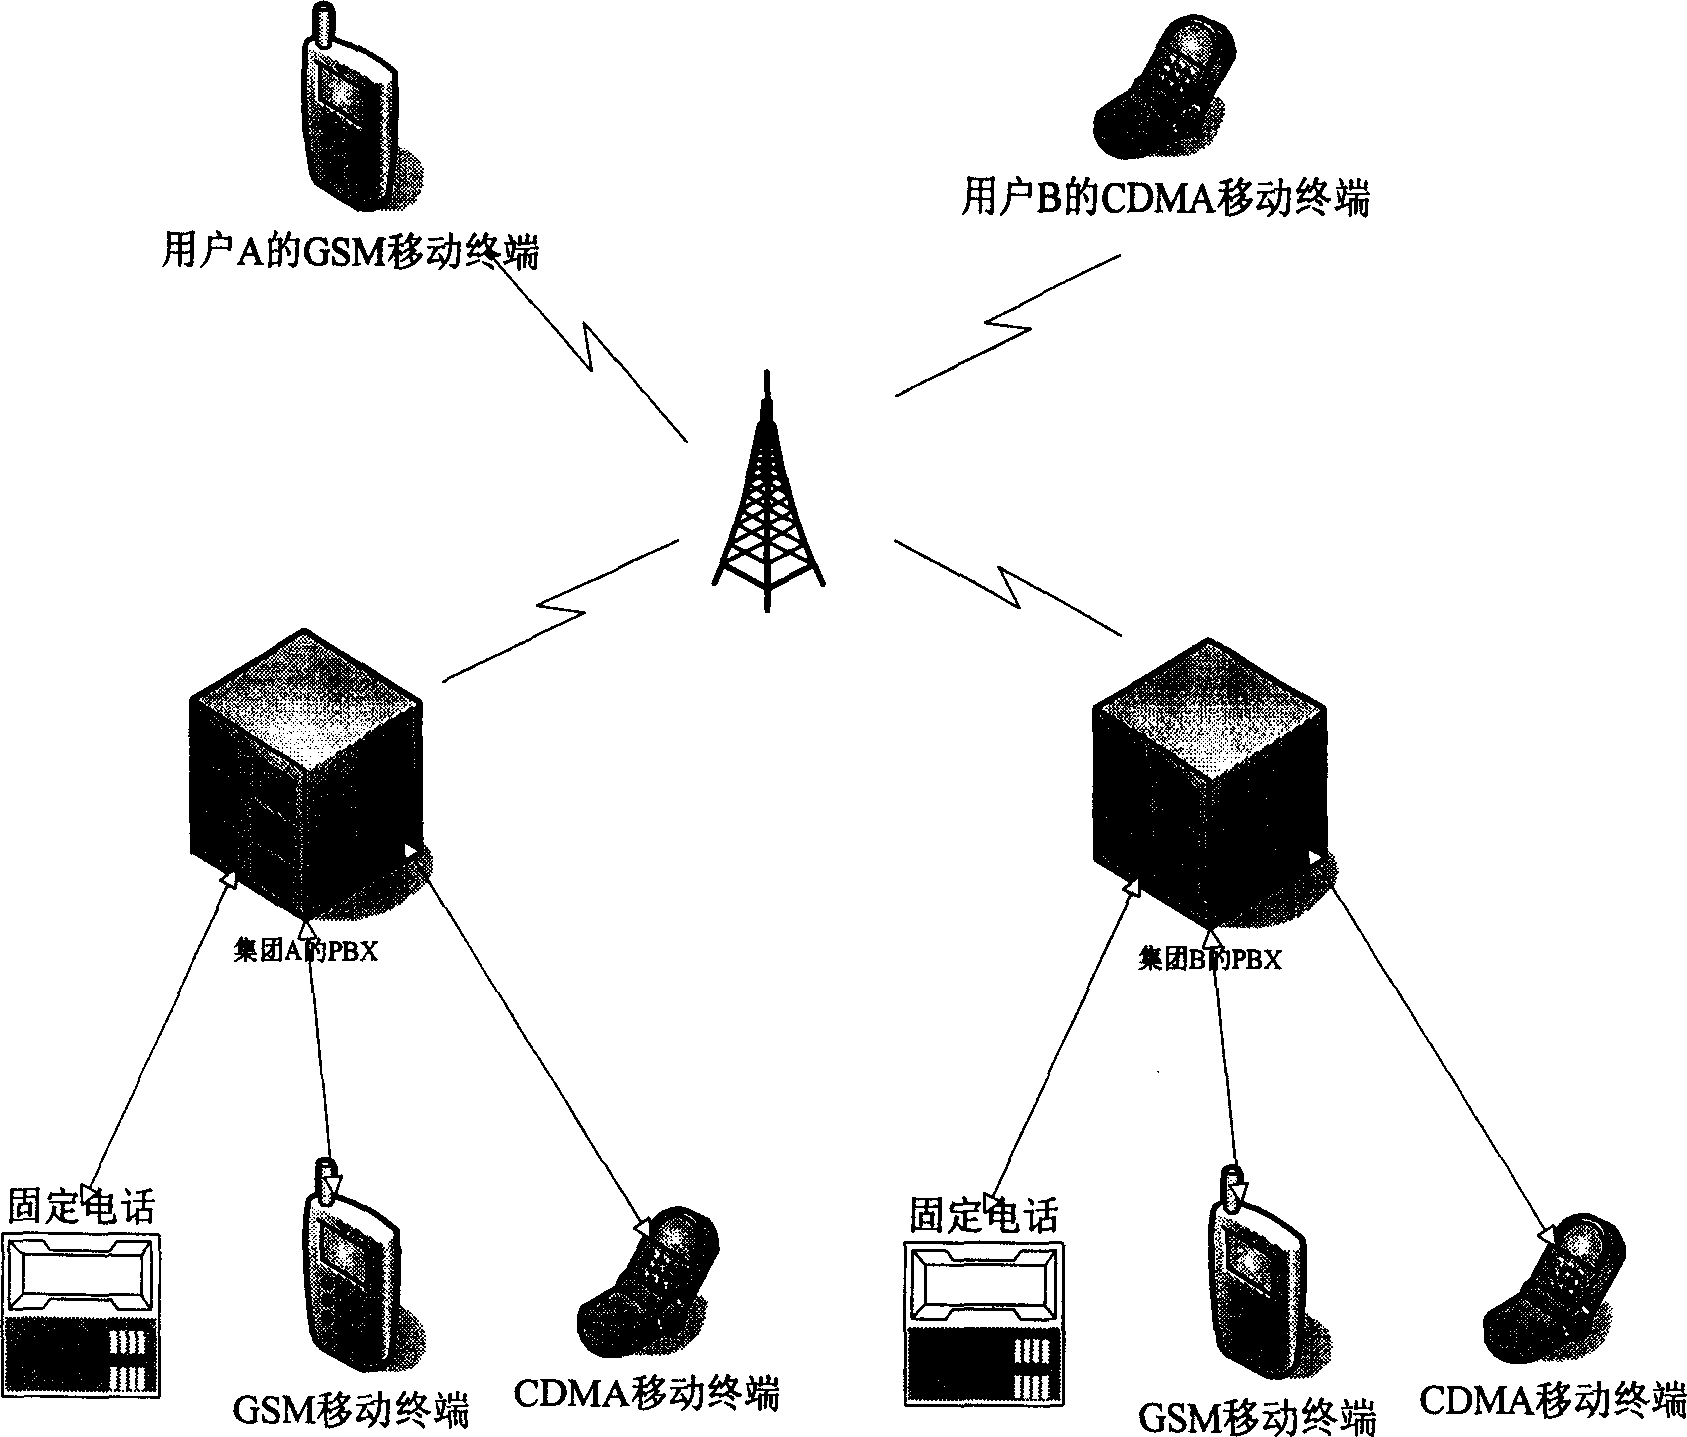 Method for providing virtual telephone exchange service by intelligent network